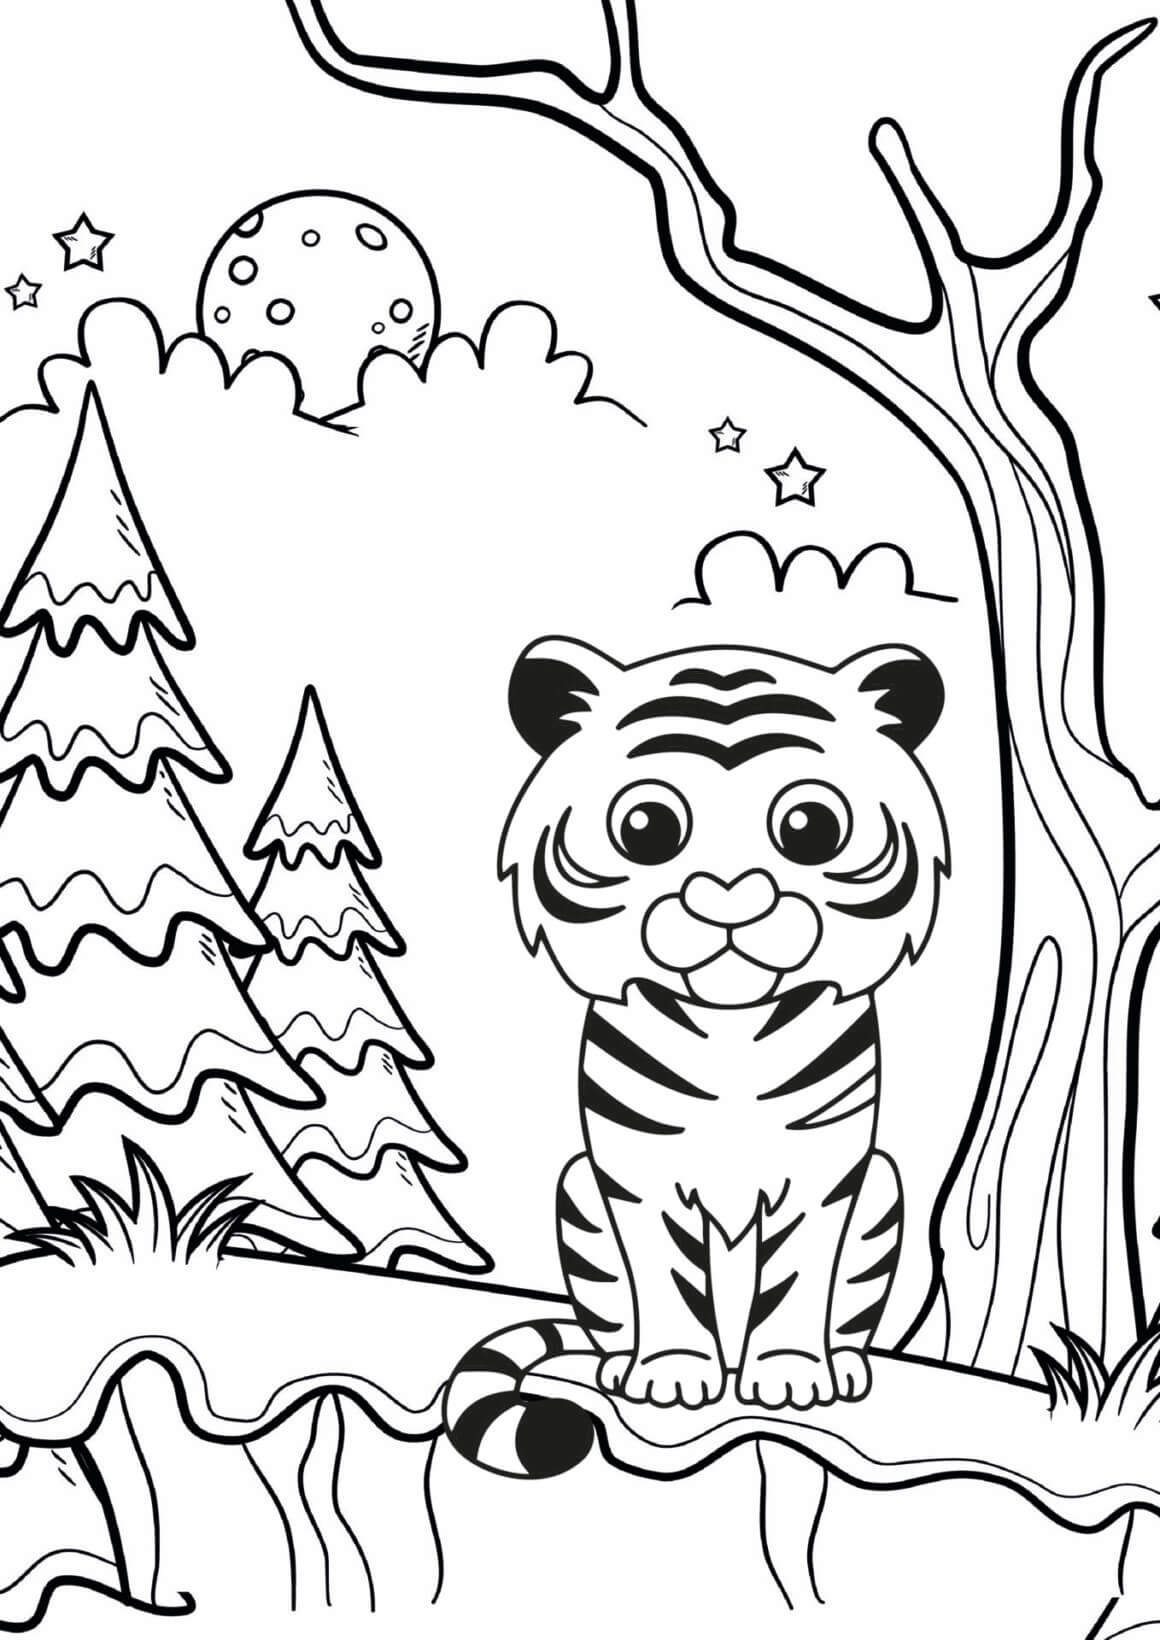 Baby tiger in forest coloring page